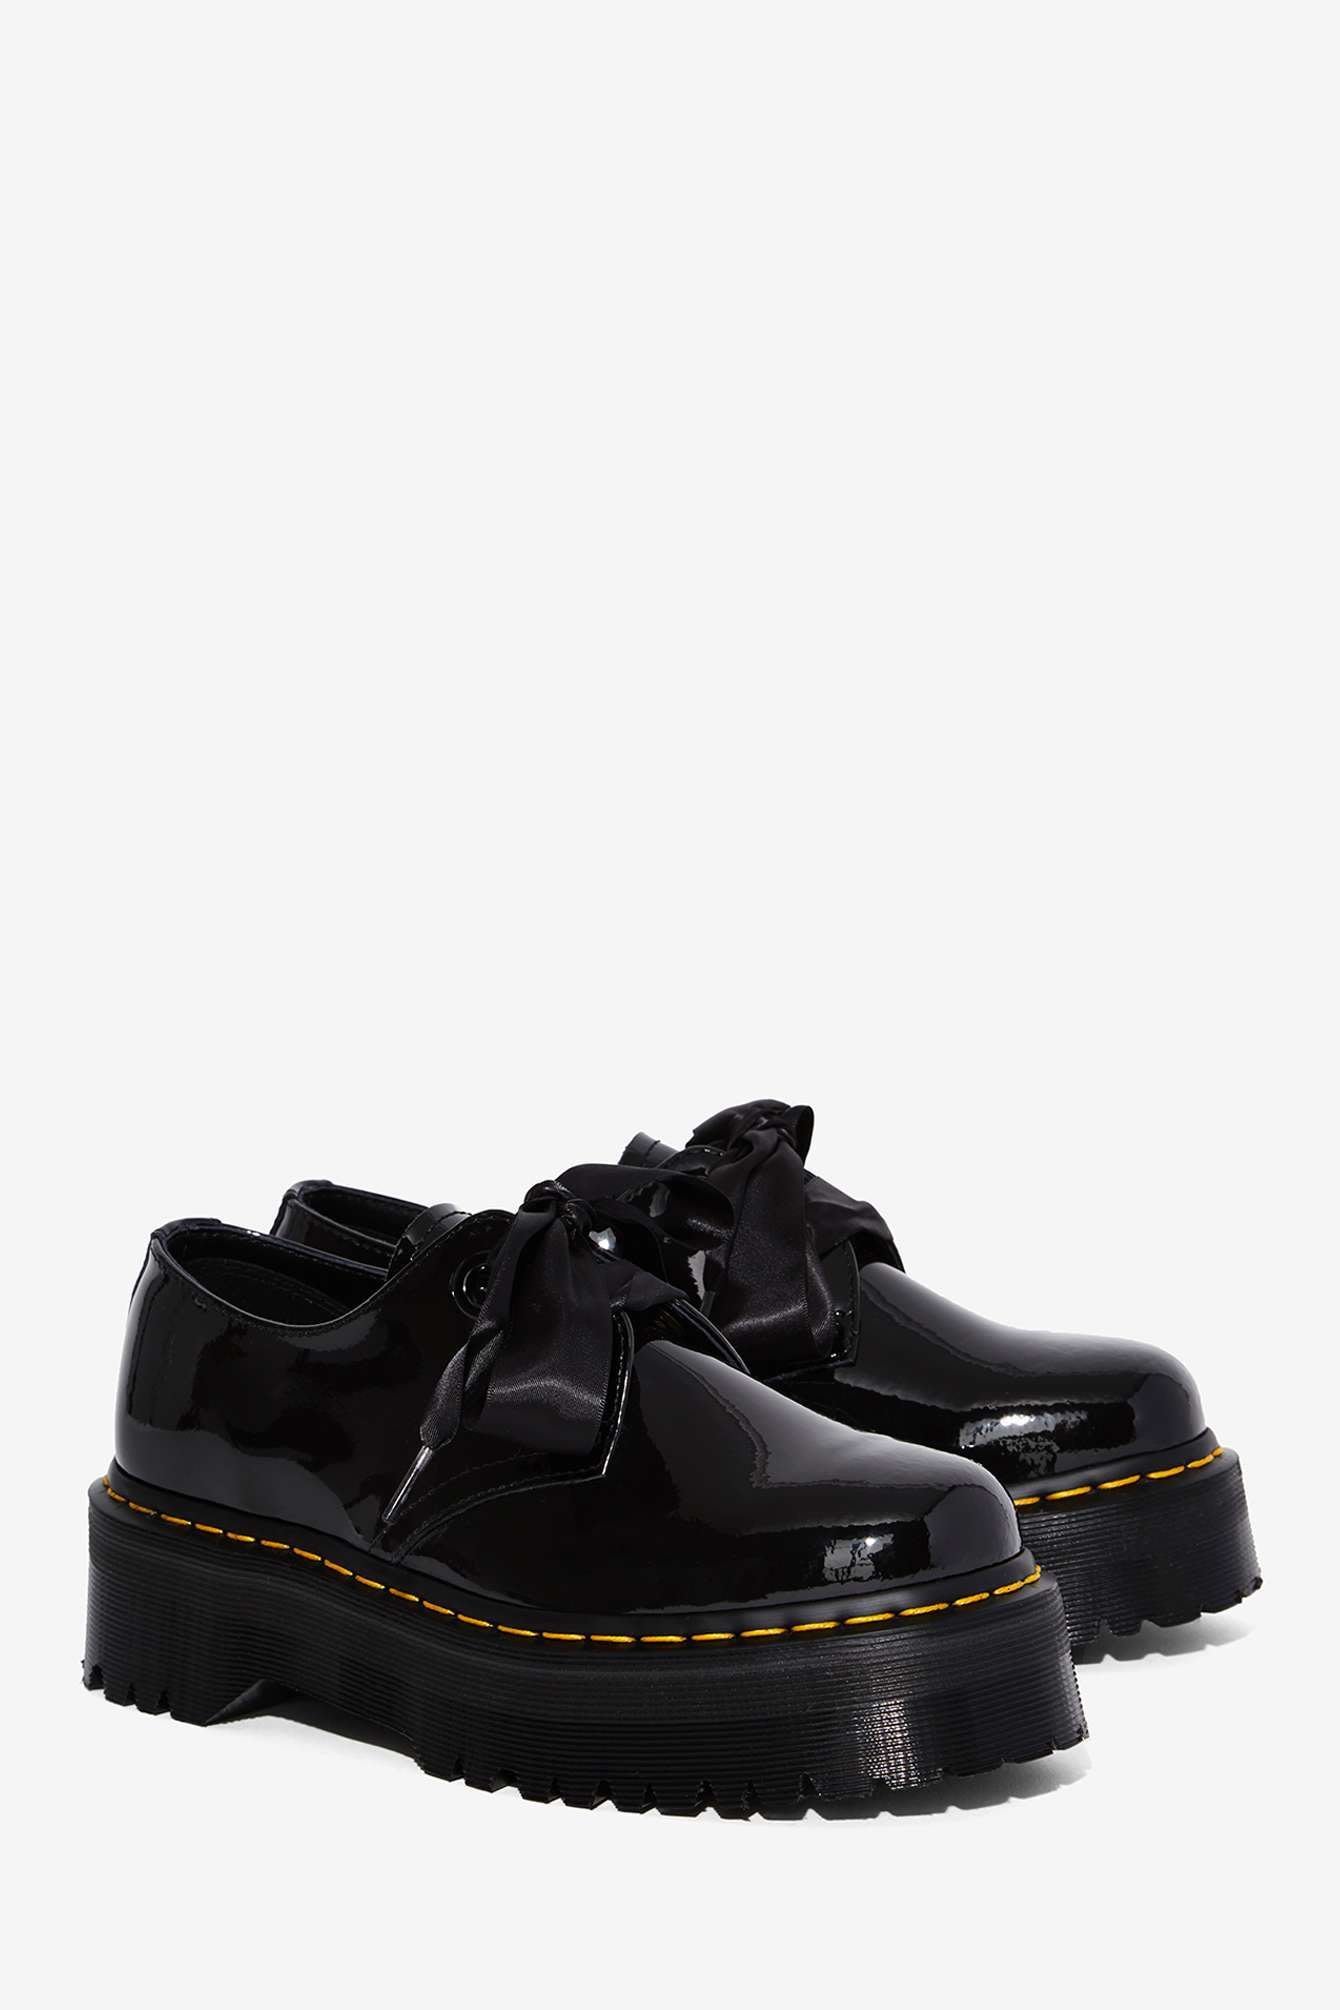 dr martens holly patent